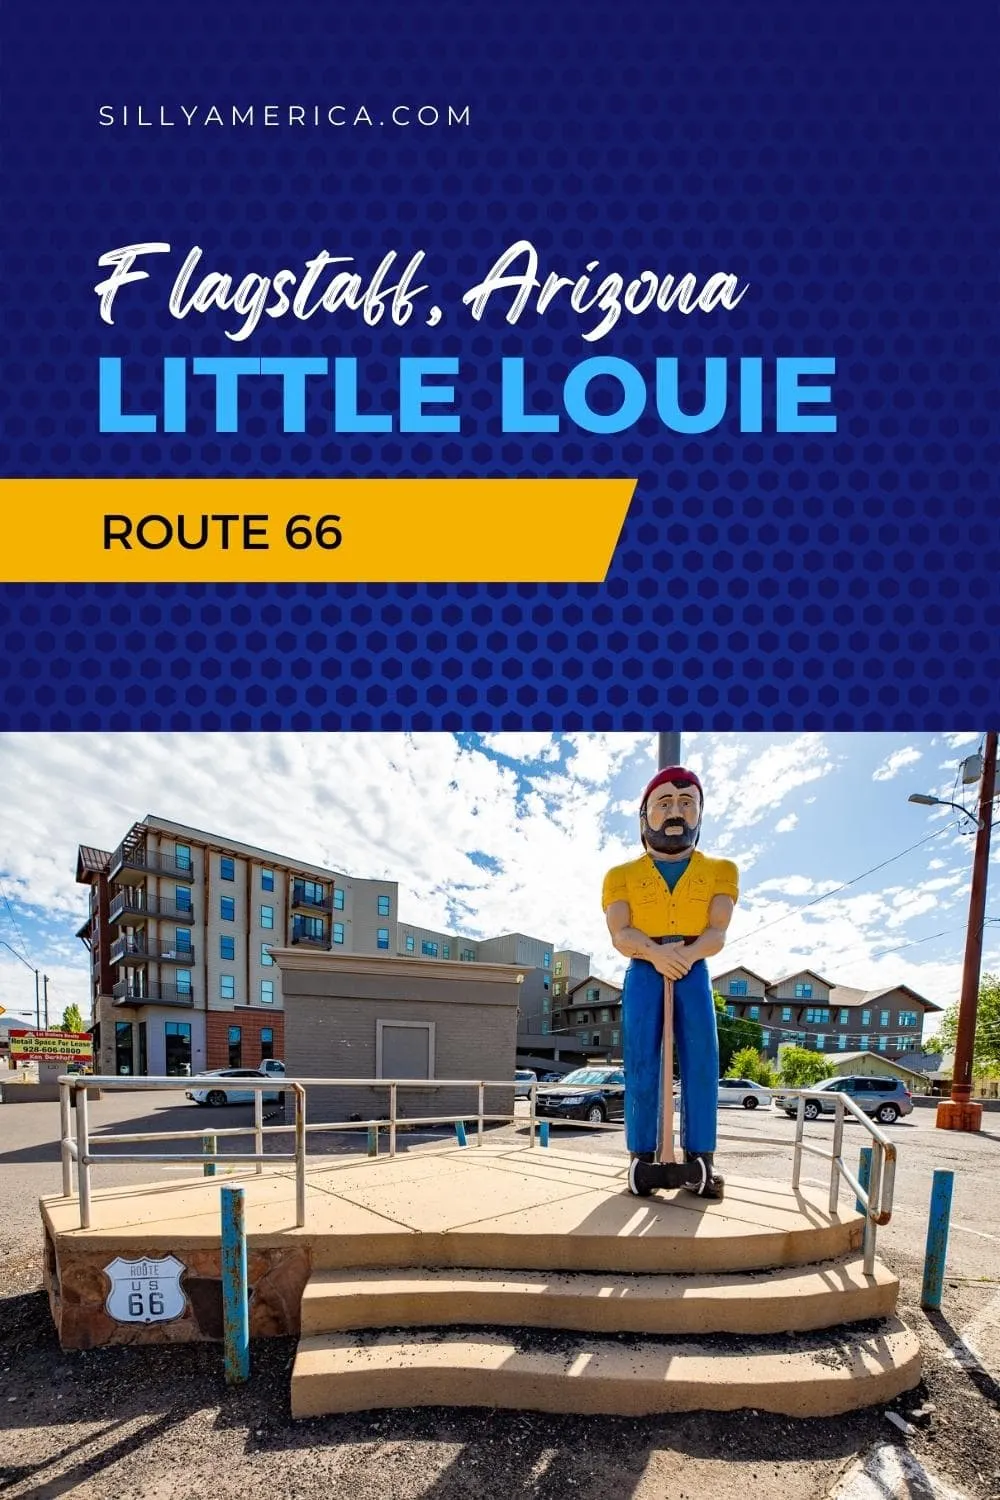 Louie, Louie, me gotta go - to Flagstaff, Arizona to see Little Louie statue, the Louie the Lumberjack statue formally of Lumberjack Cafe Café fame.
Little Louie was not a muffler man. This ten-foot tall lumberjack was carved from cedar wood and was a little more short and stout than his fiberglass counterparts. But he was a beloved sculpture all the same.
Find this Route 66 roadside attraction in Flagstaff, Arizona - visit on your Route 66 road trip!
#Route66 #Route66RoadsideAttraction